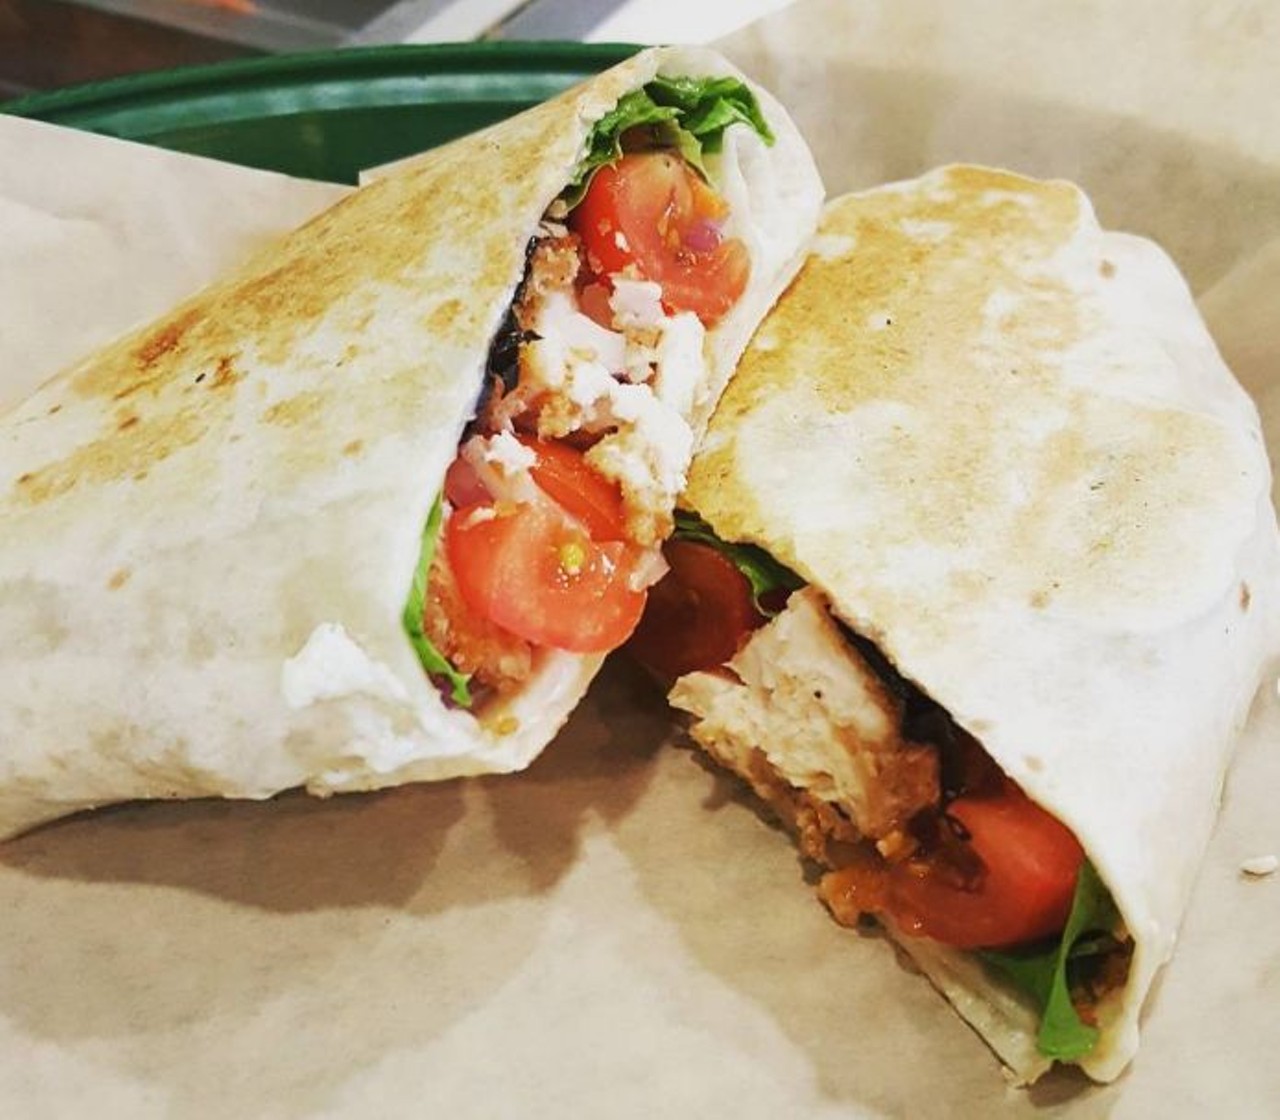 Pearson&#146;s Caf&eacute;
Homemade breads, locally sourced coffee, and a bevy of soups, salads and sandwiches under $10--Pearson&#146;s Cafe is one downtown, downtempo lunch and brunch option you shouldn&#146;t miss. Orders are also available for catering and takeout.
Photo via  ryan_n_sky/Instagram